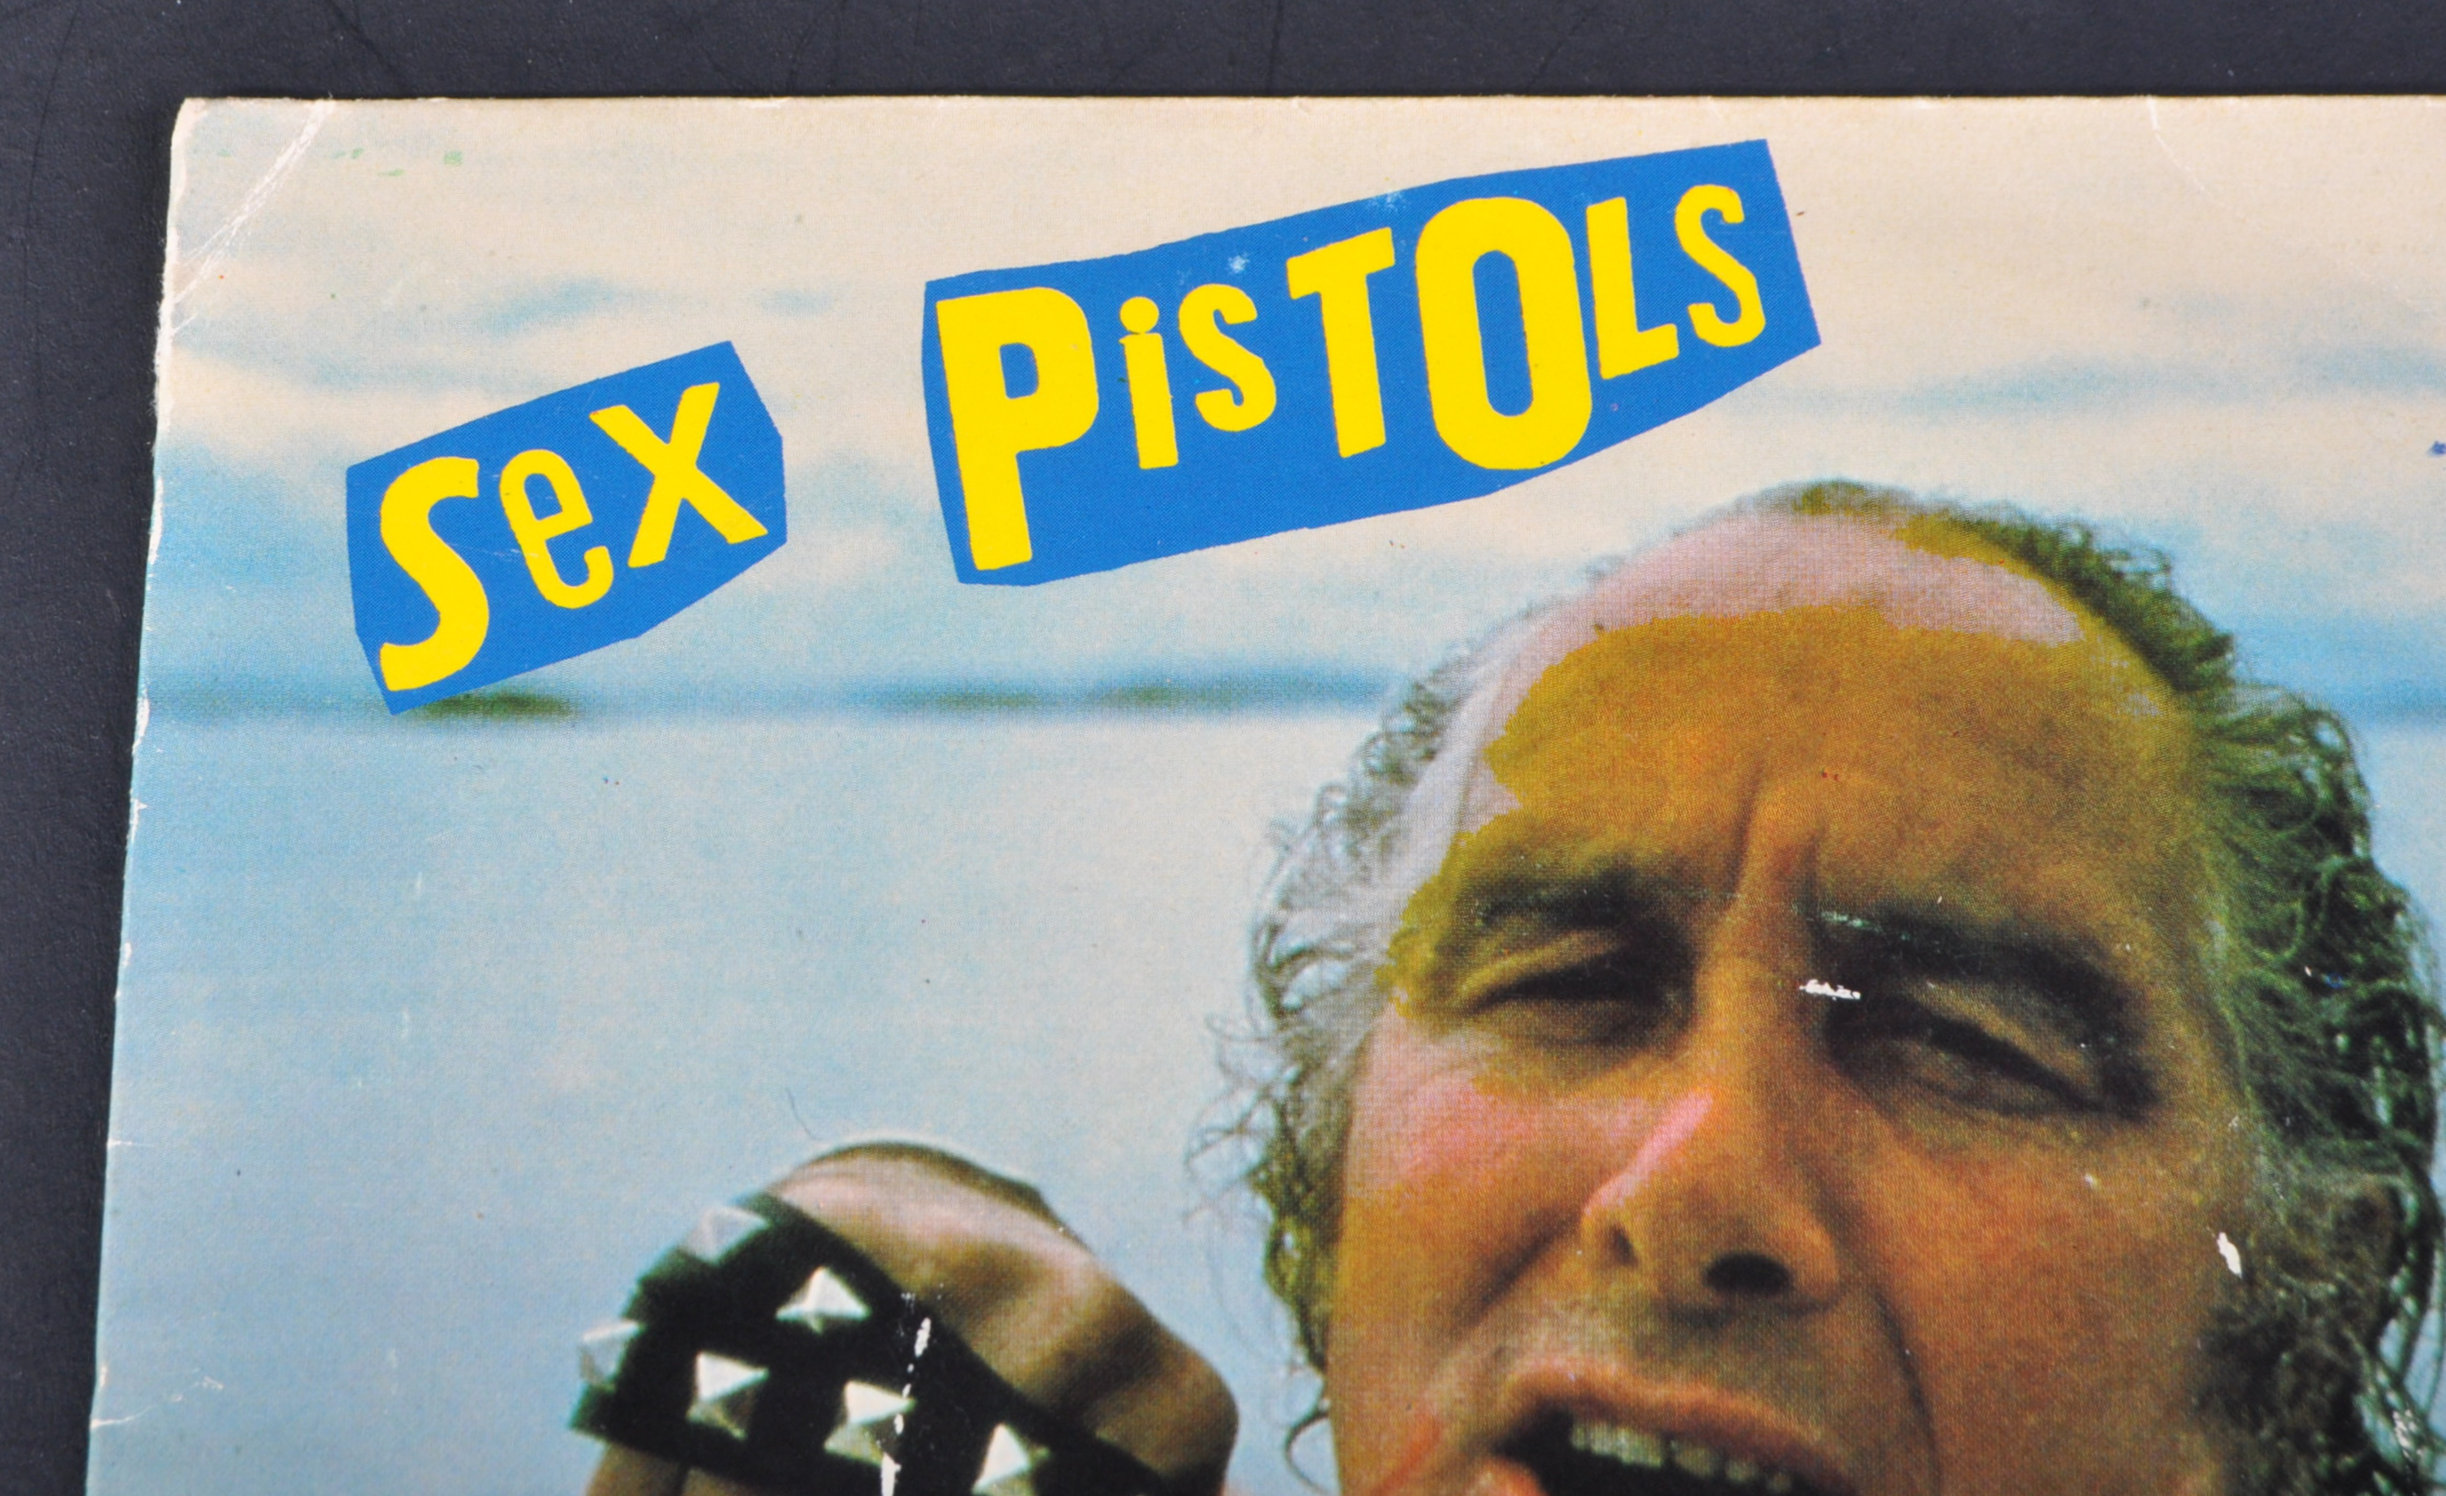 GREAT TRAIN ROBBERY - RONNIE BIGGS - SEX PISTOLS SIGNED RECORD - Image 3 of 4